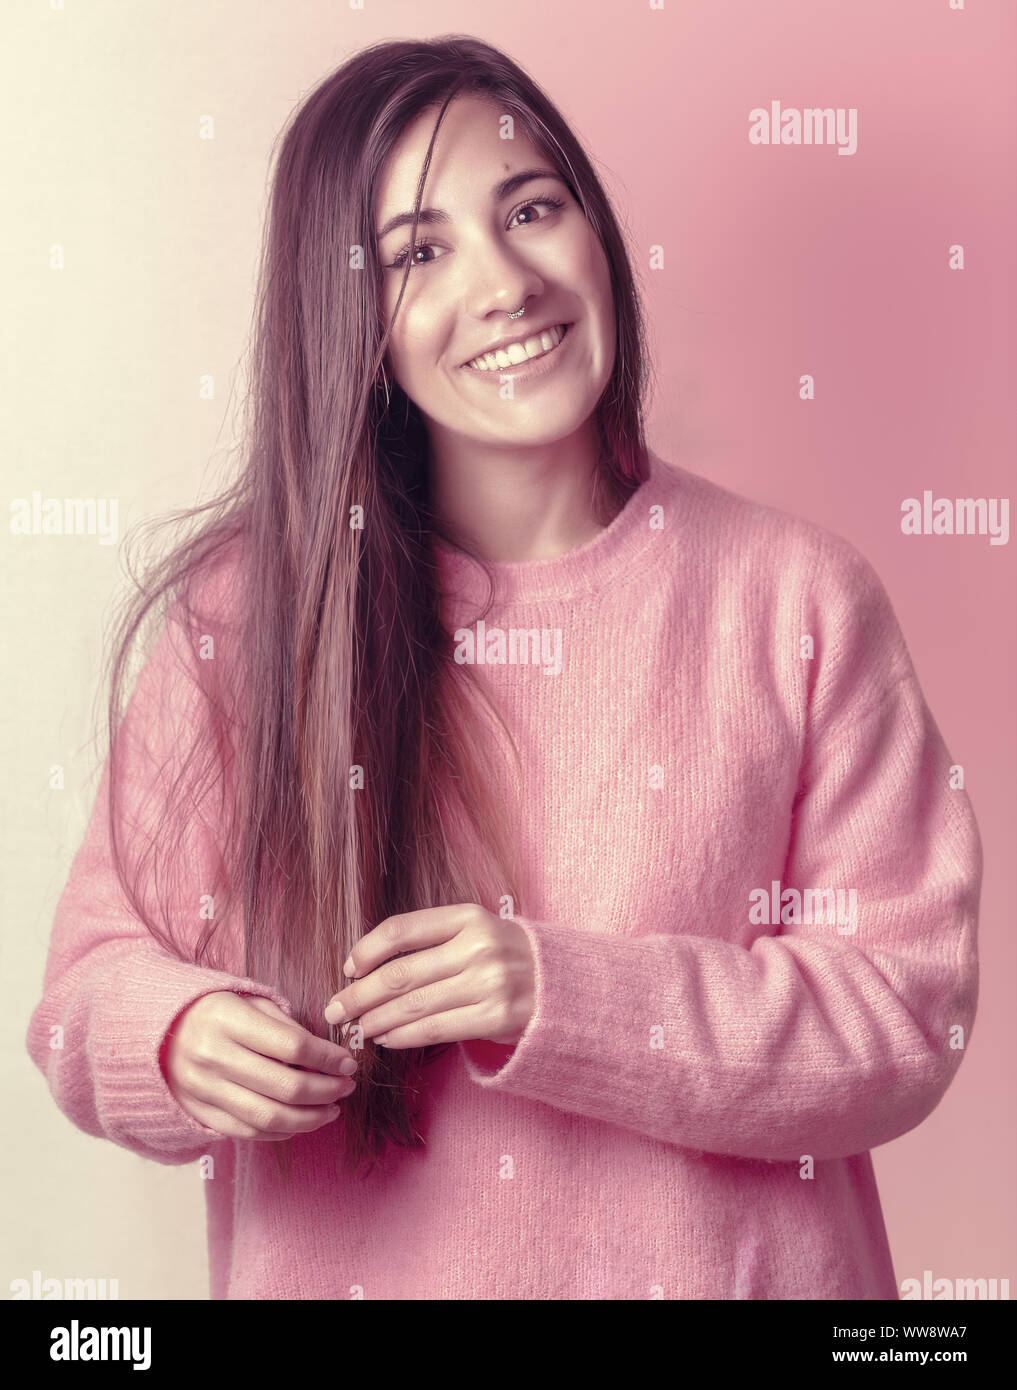 Pretty girl with straight hair and a pink sweater Stock Photo